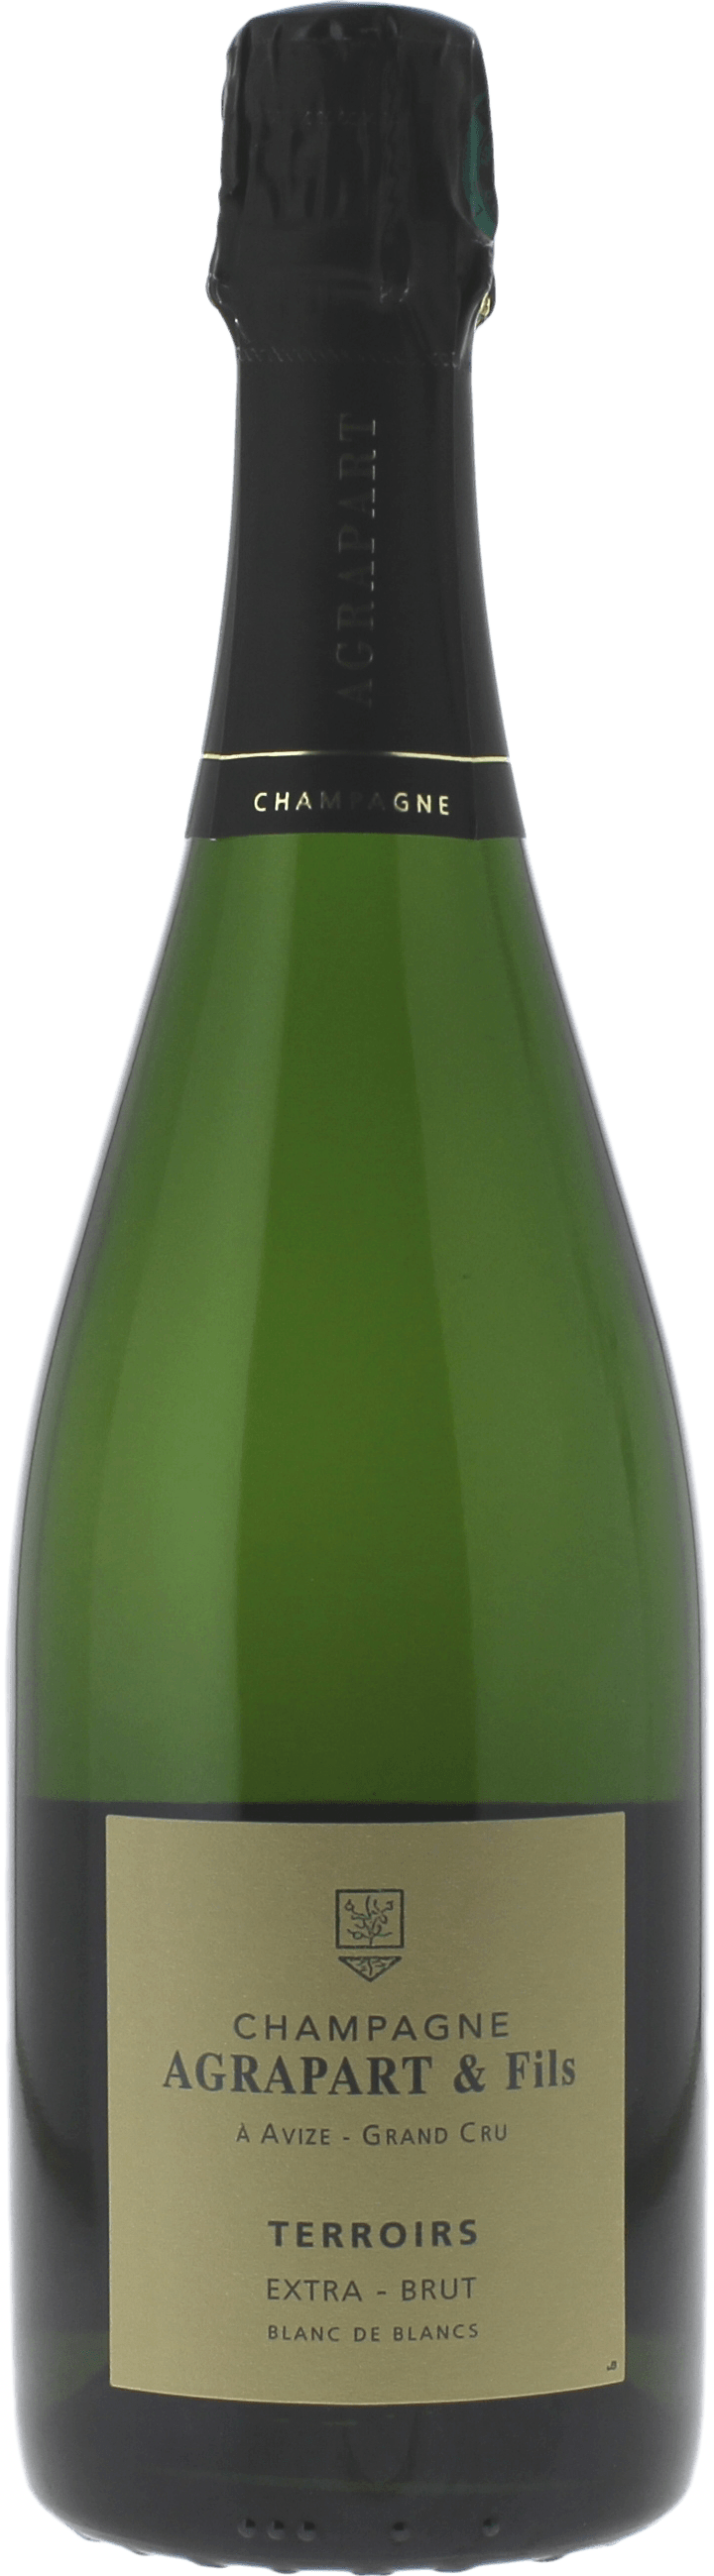 Agrapart  terroirs extra brut blanc de blancs  Agrapart, Champagne